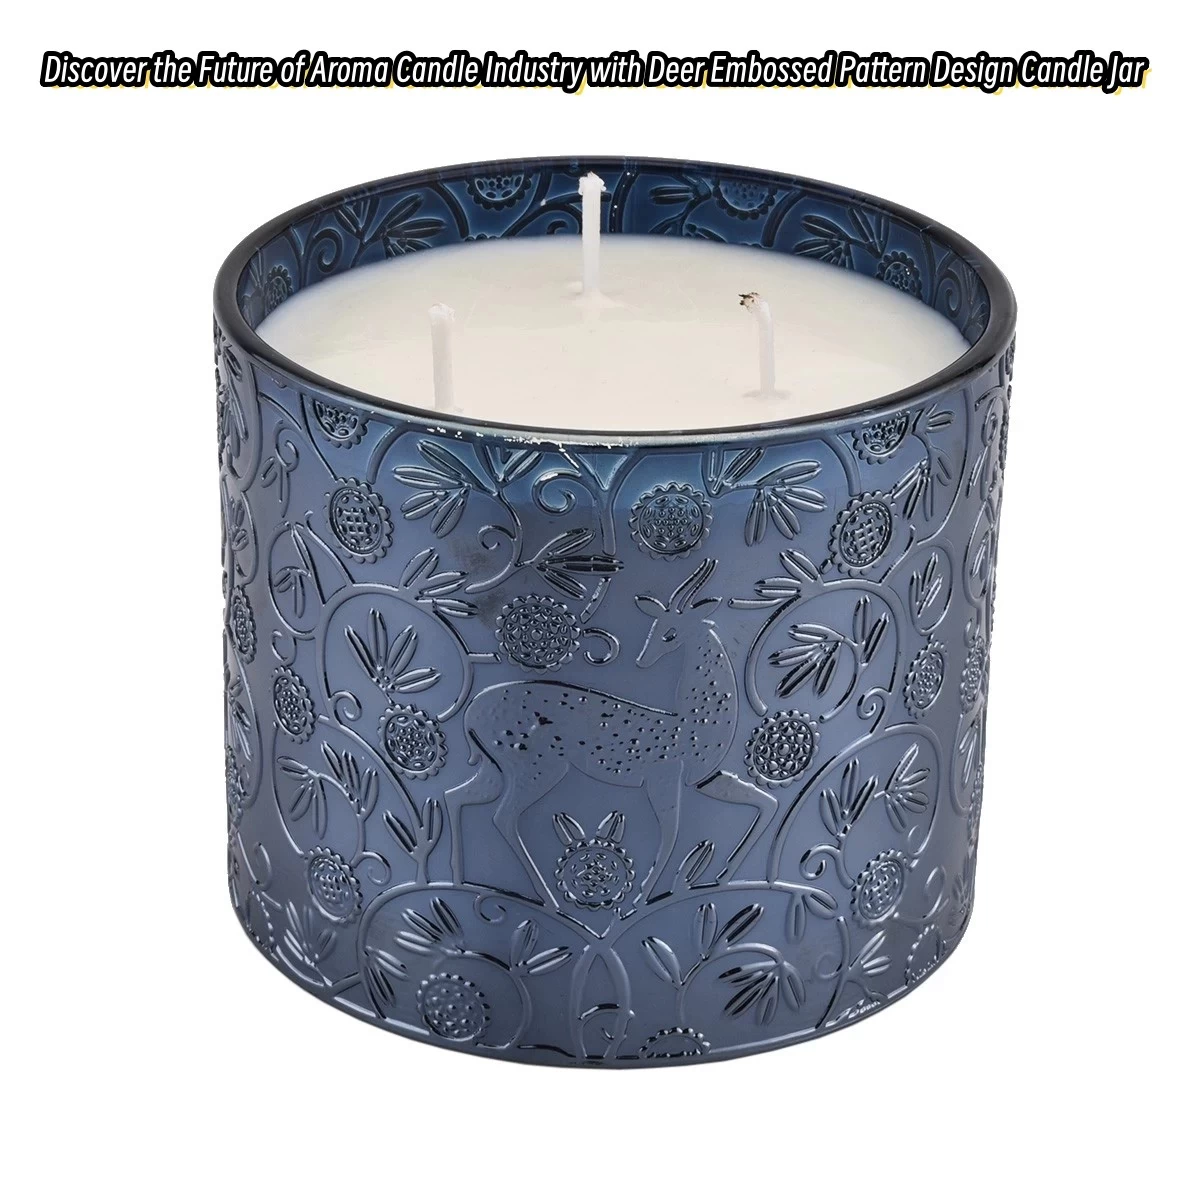 Discover the Future of Aroma Candle Industry with Deer Embossed Pattern Design Candle Jar